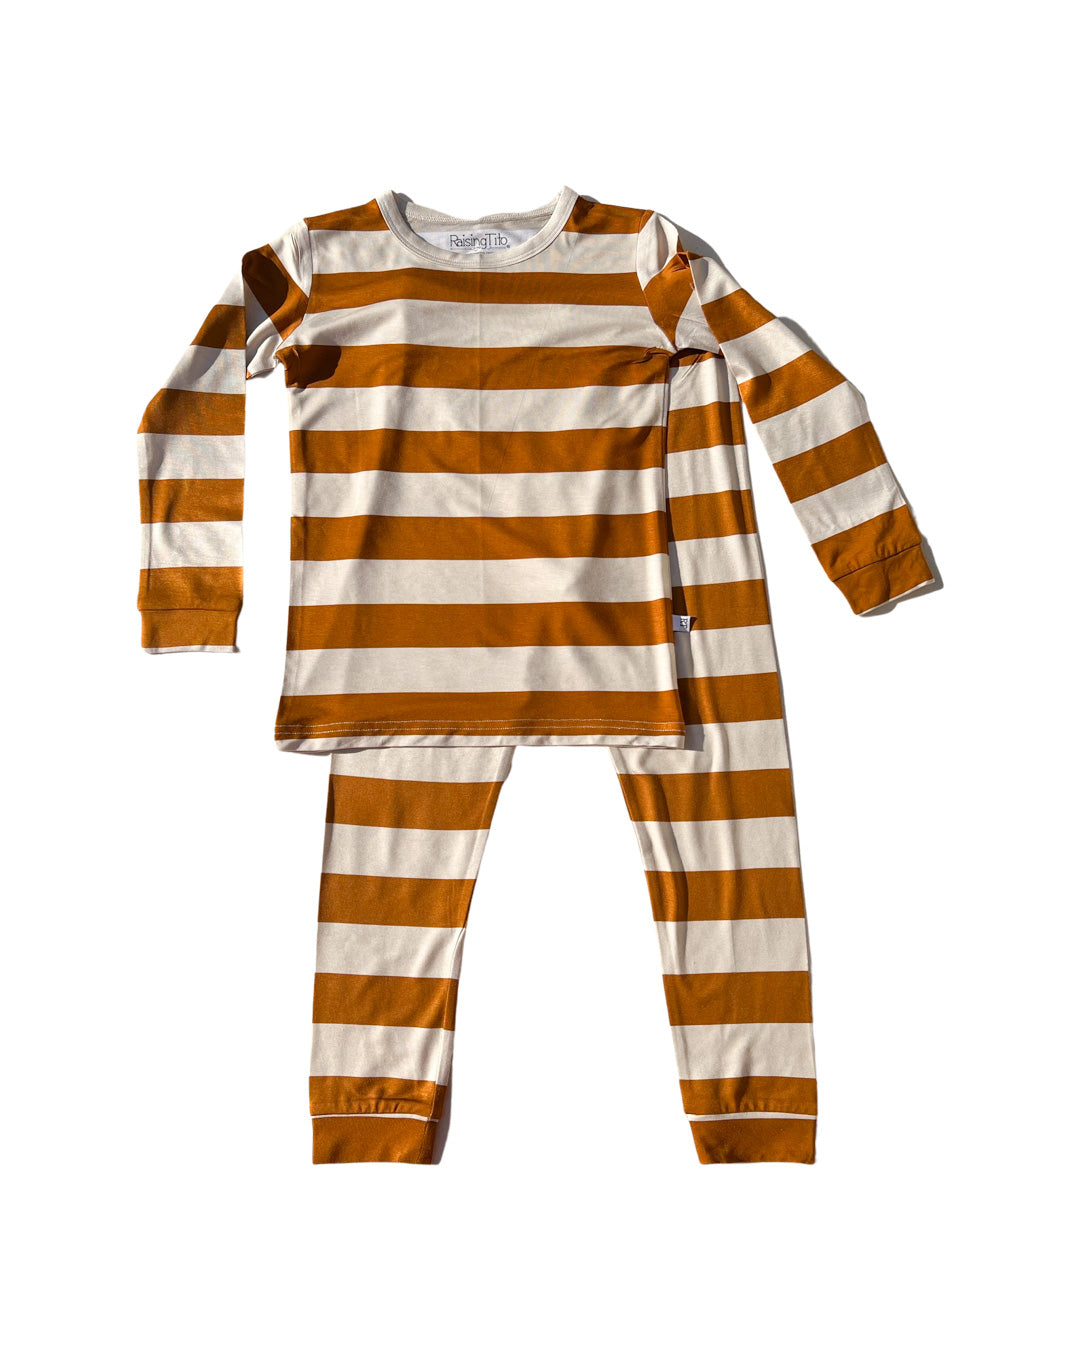 Gold Stripe - 2 Piece Set  - The Luna Collection [READY TO SHIP]